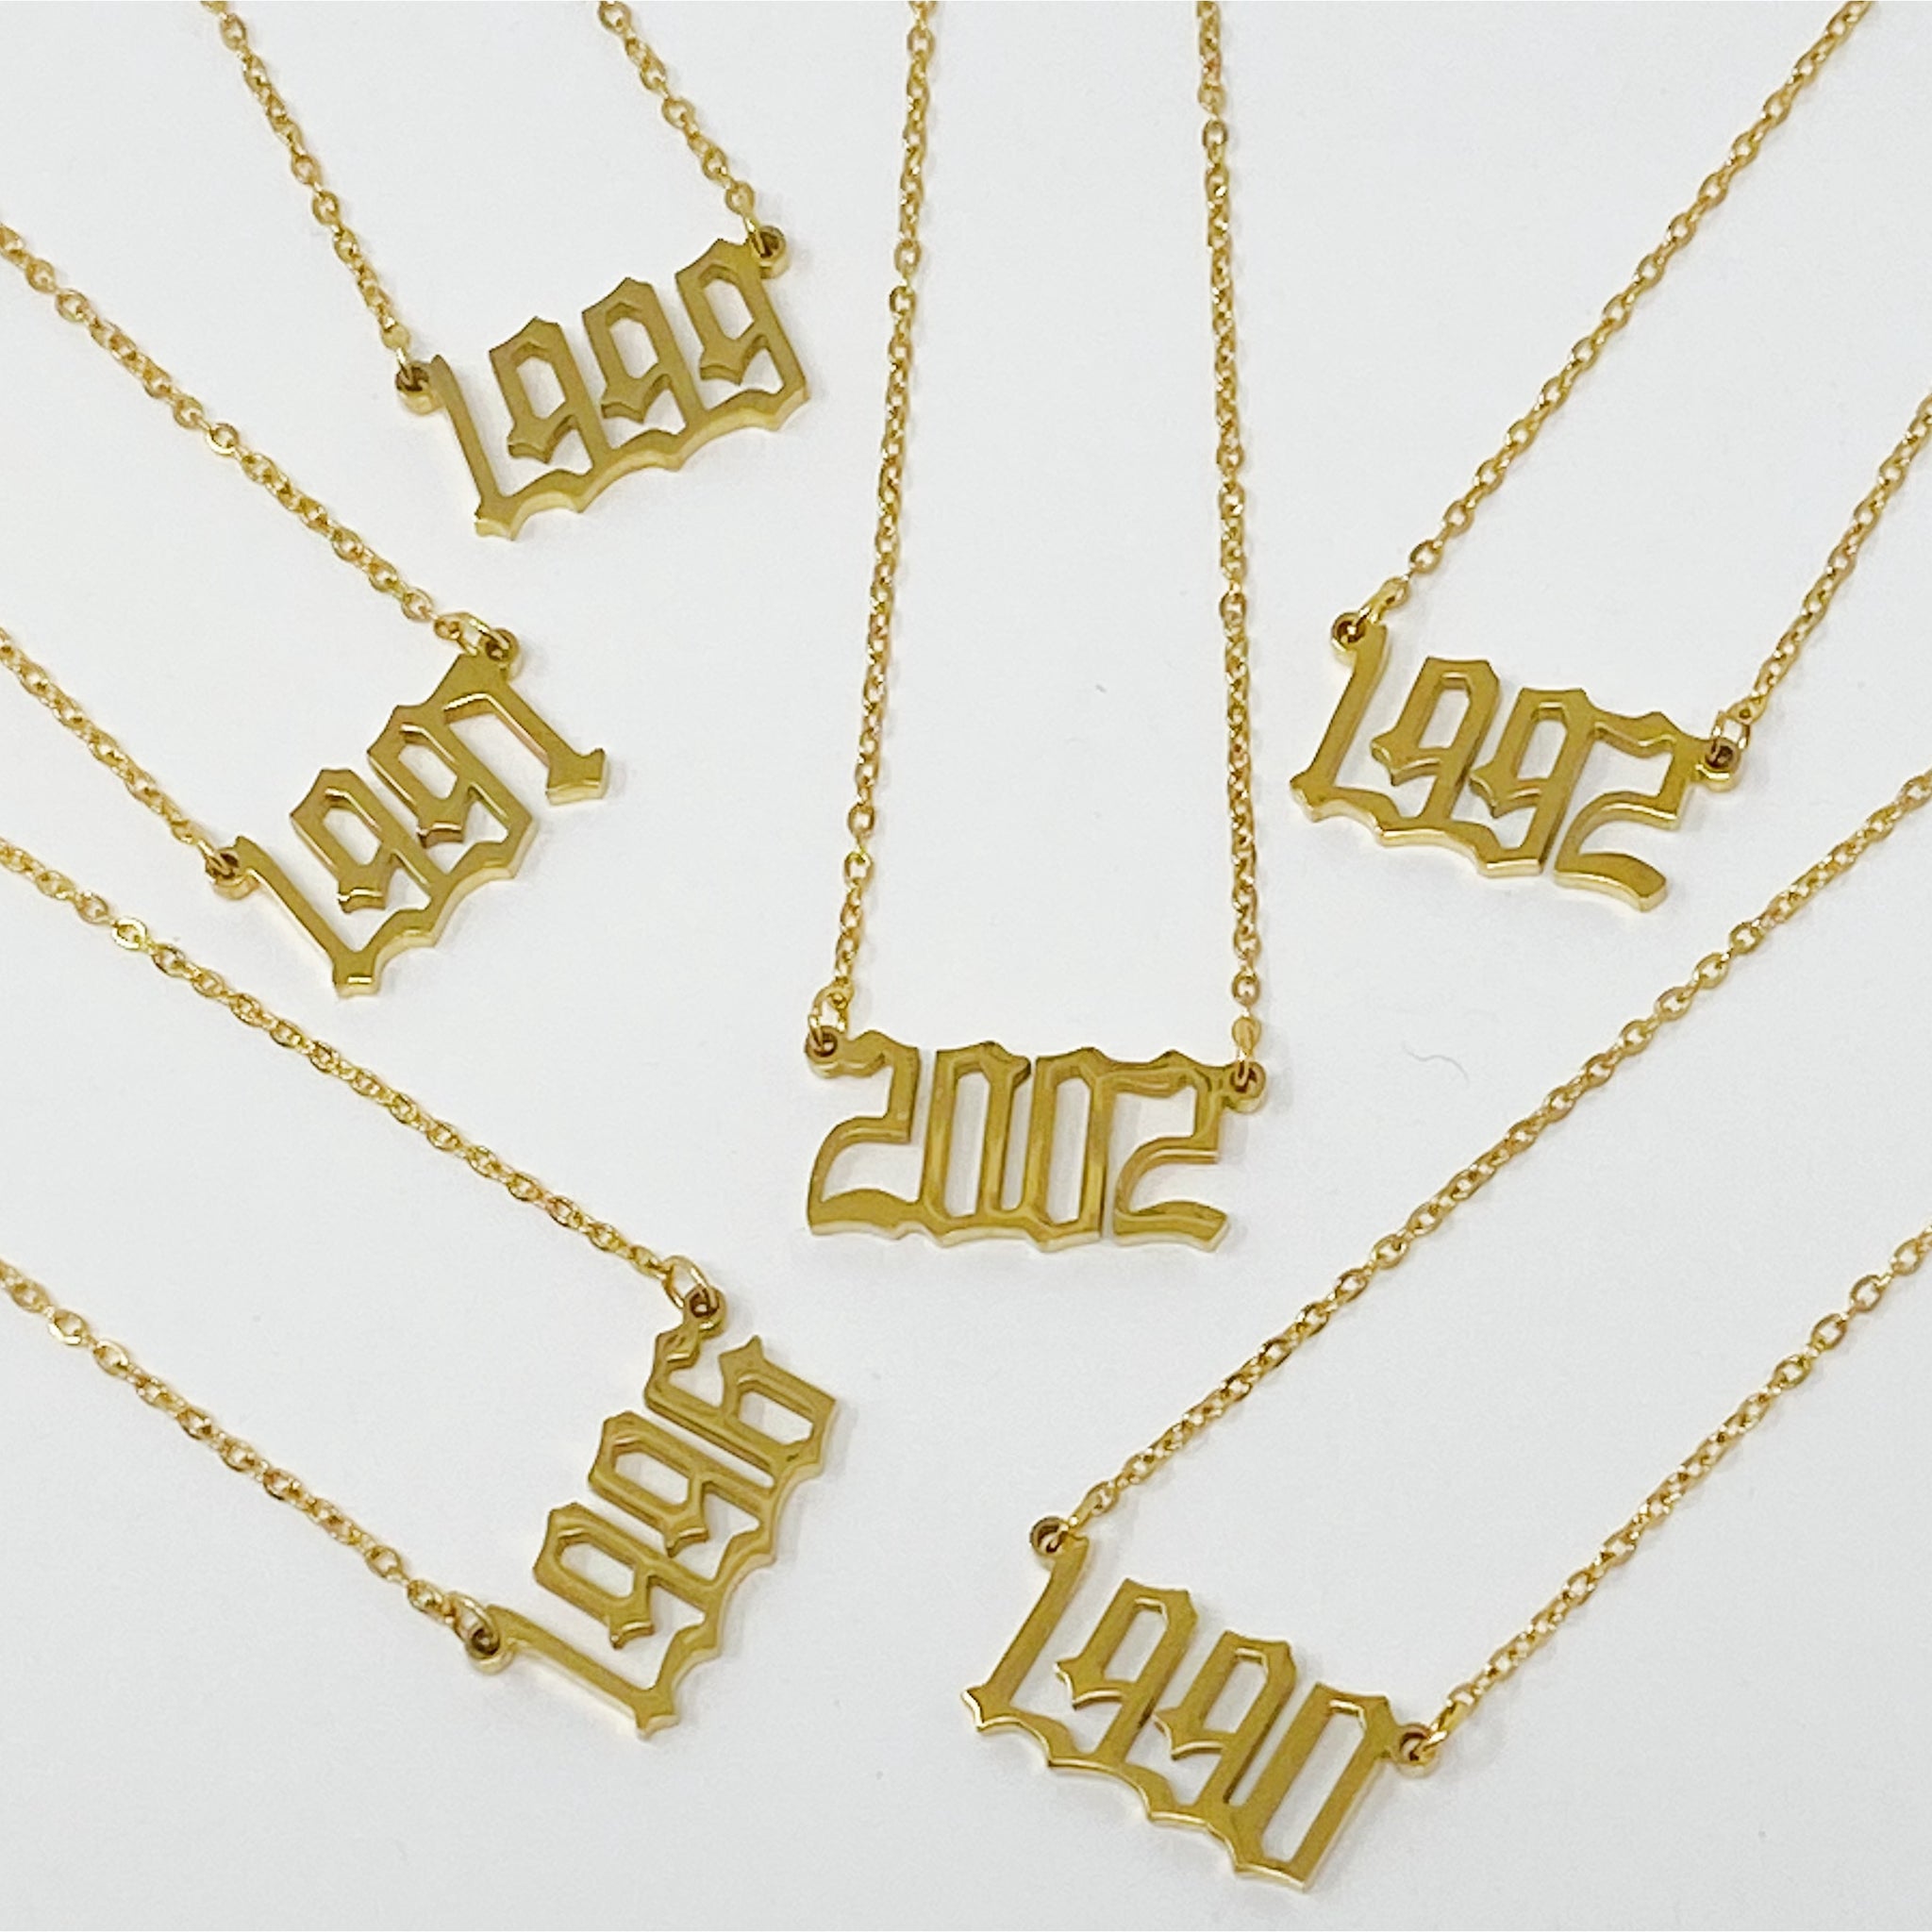 Birth Year Necklace - Multiple